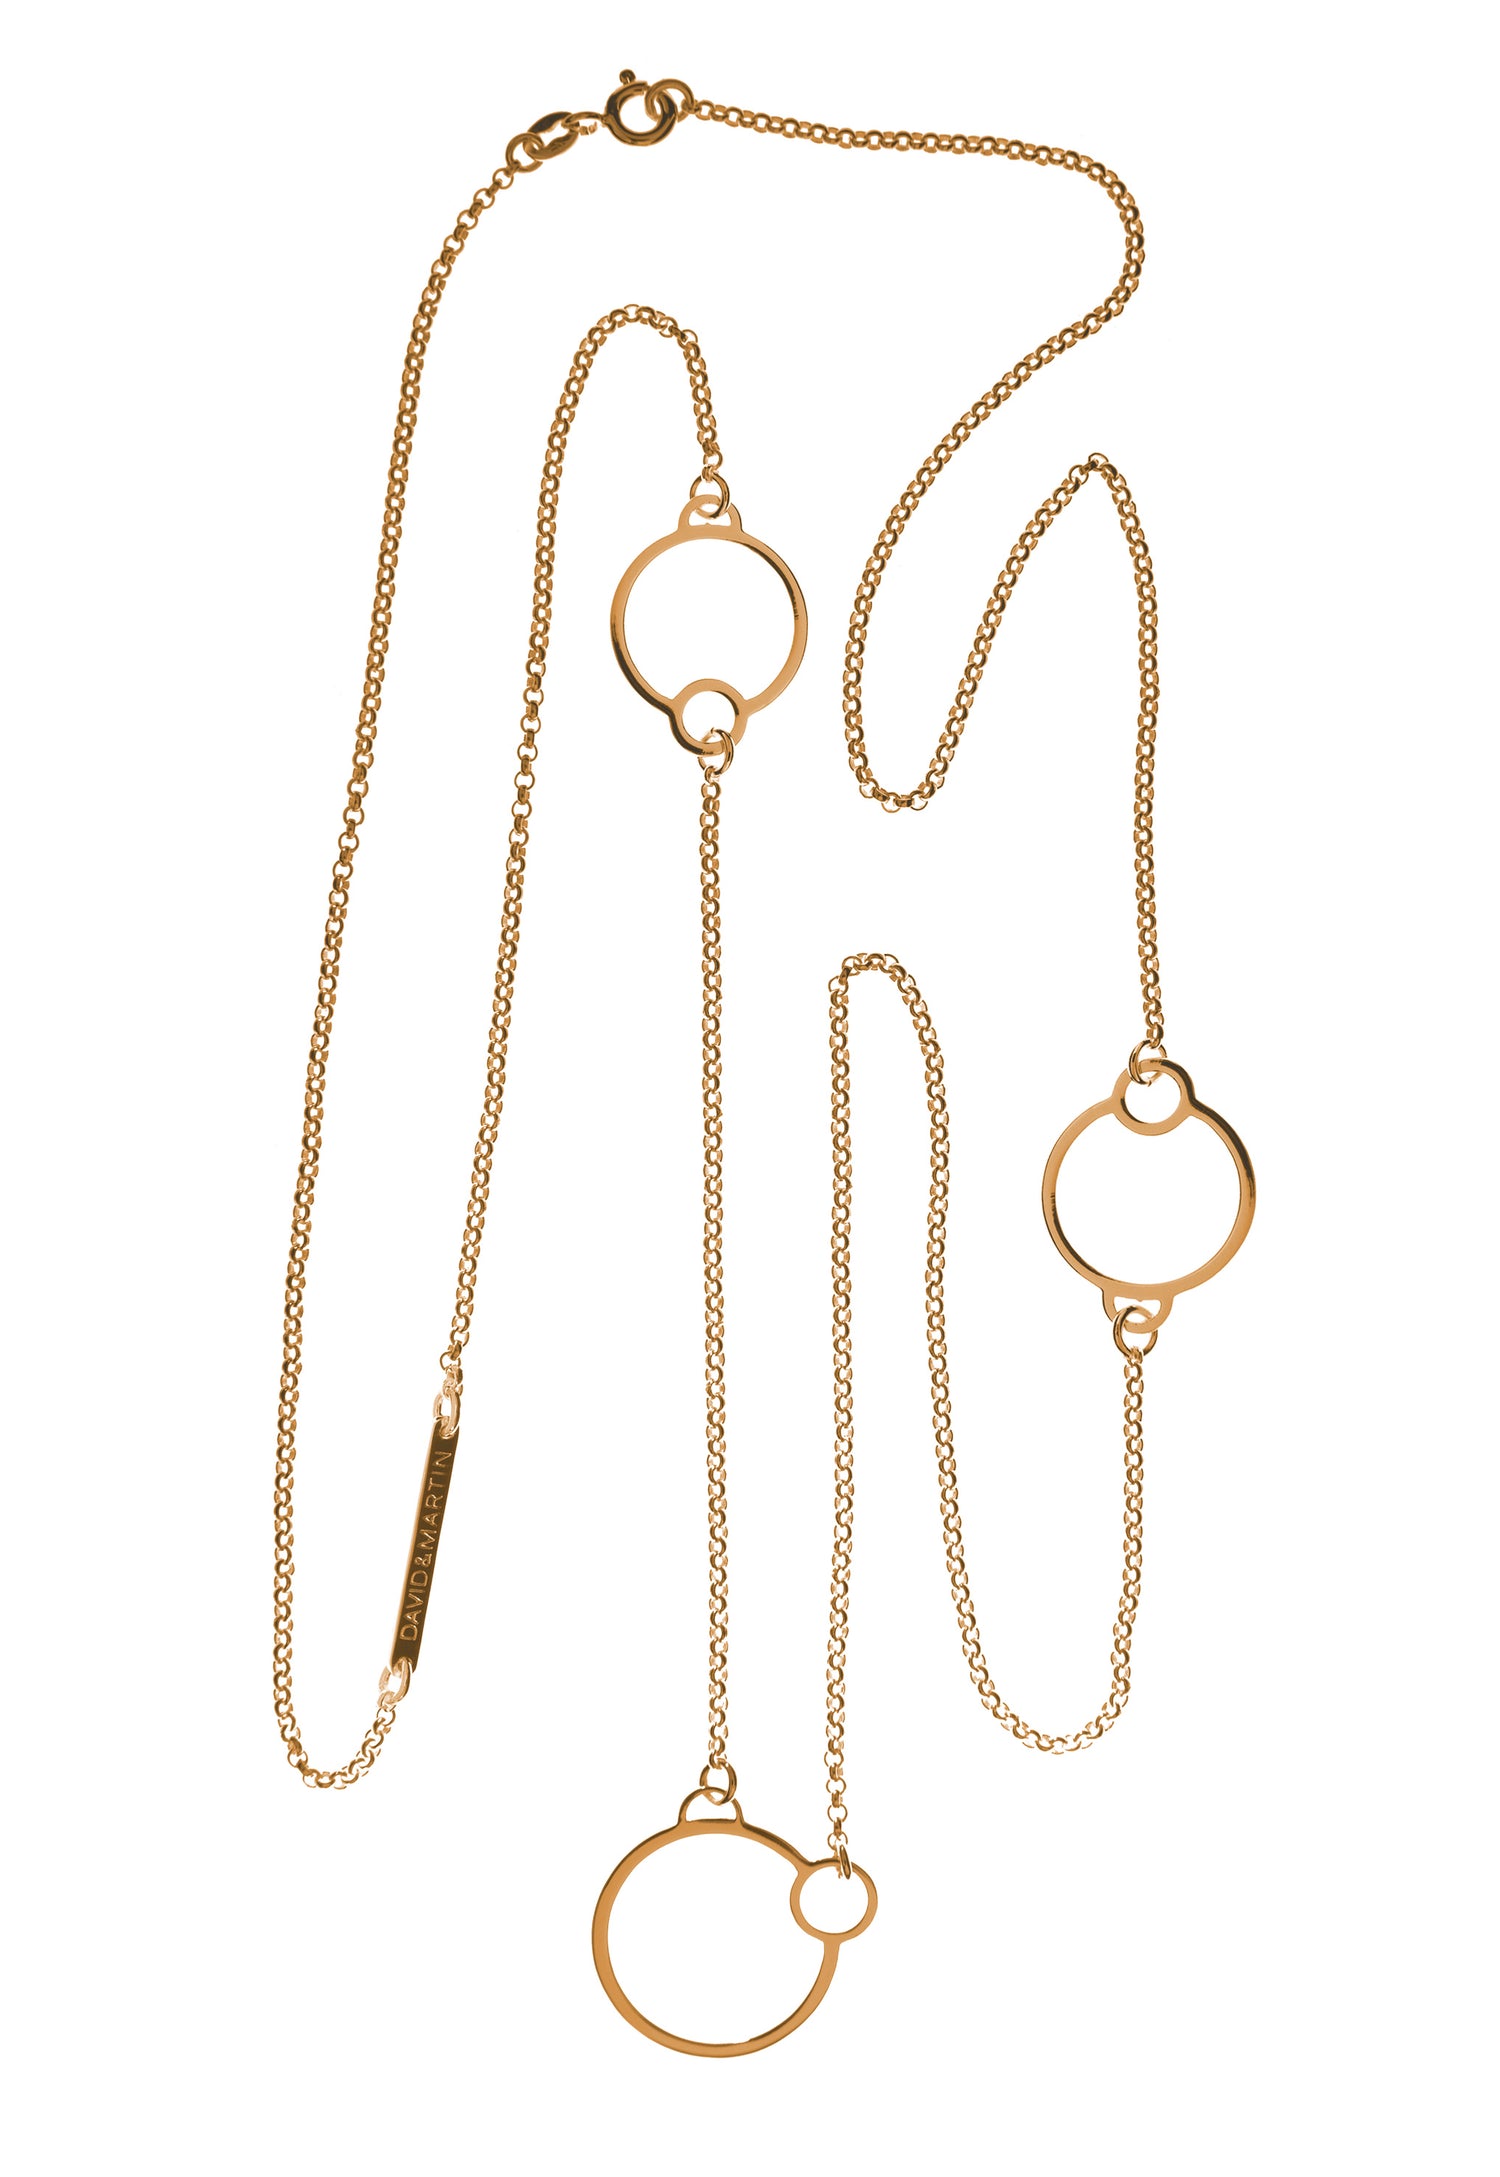 Contemporary designer long necklace with 3 circles from popular Circles collection by David&Martin. The chain is long enough for it to be worn as a two-layered short necklace.   Material: 18 karat gold-plated silver.   Size: the length is 90cm. 